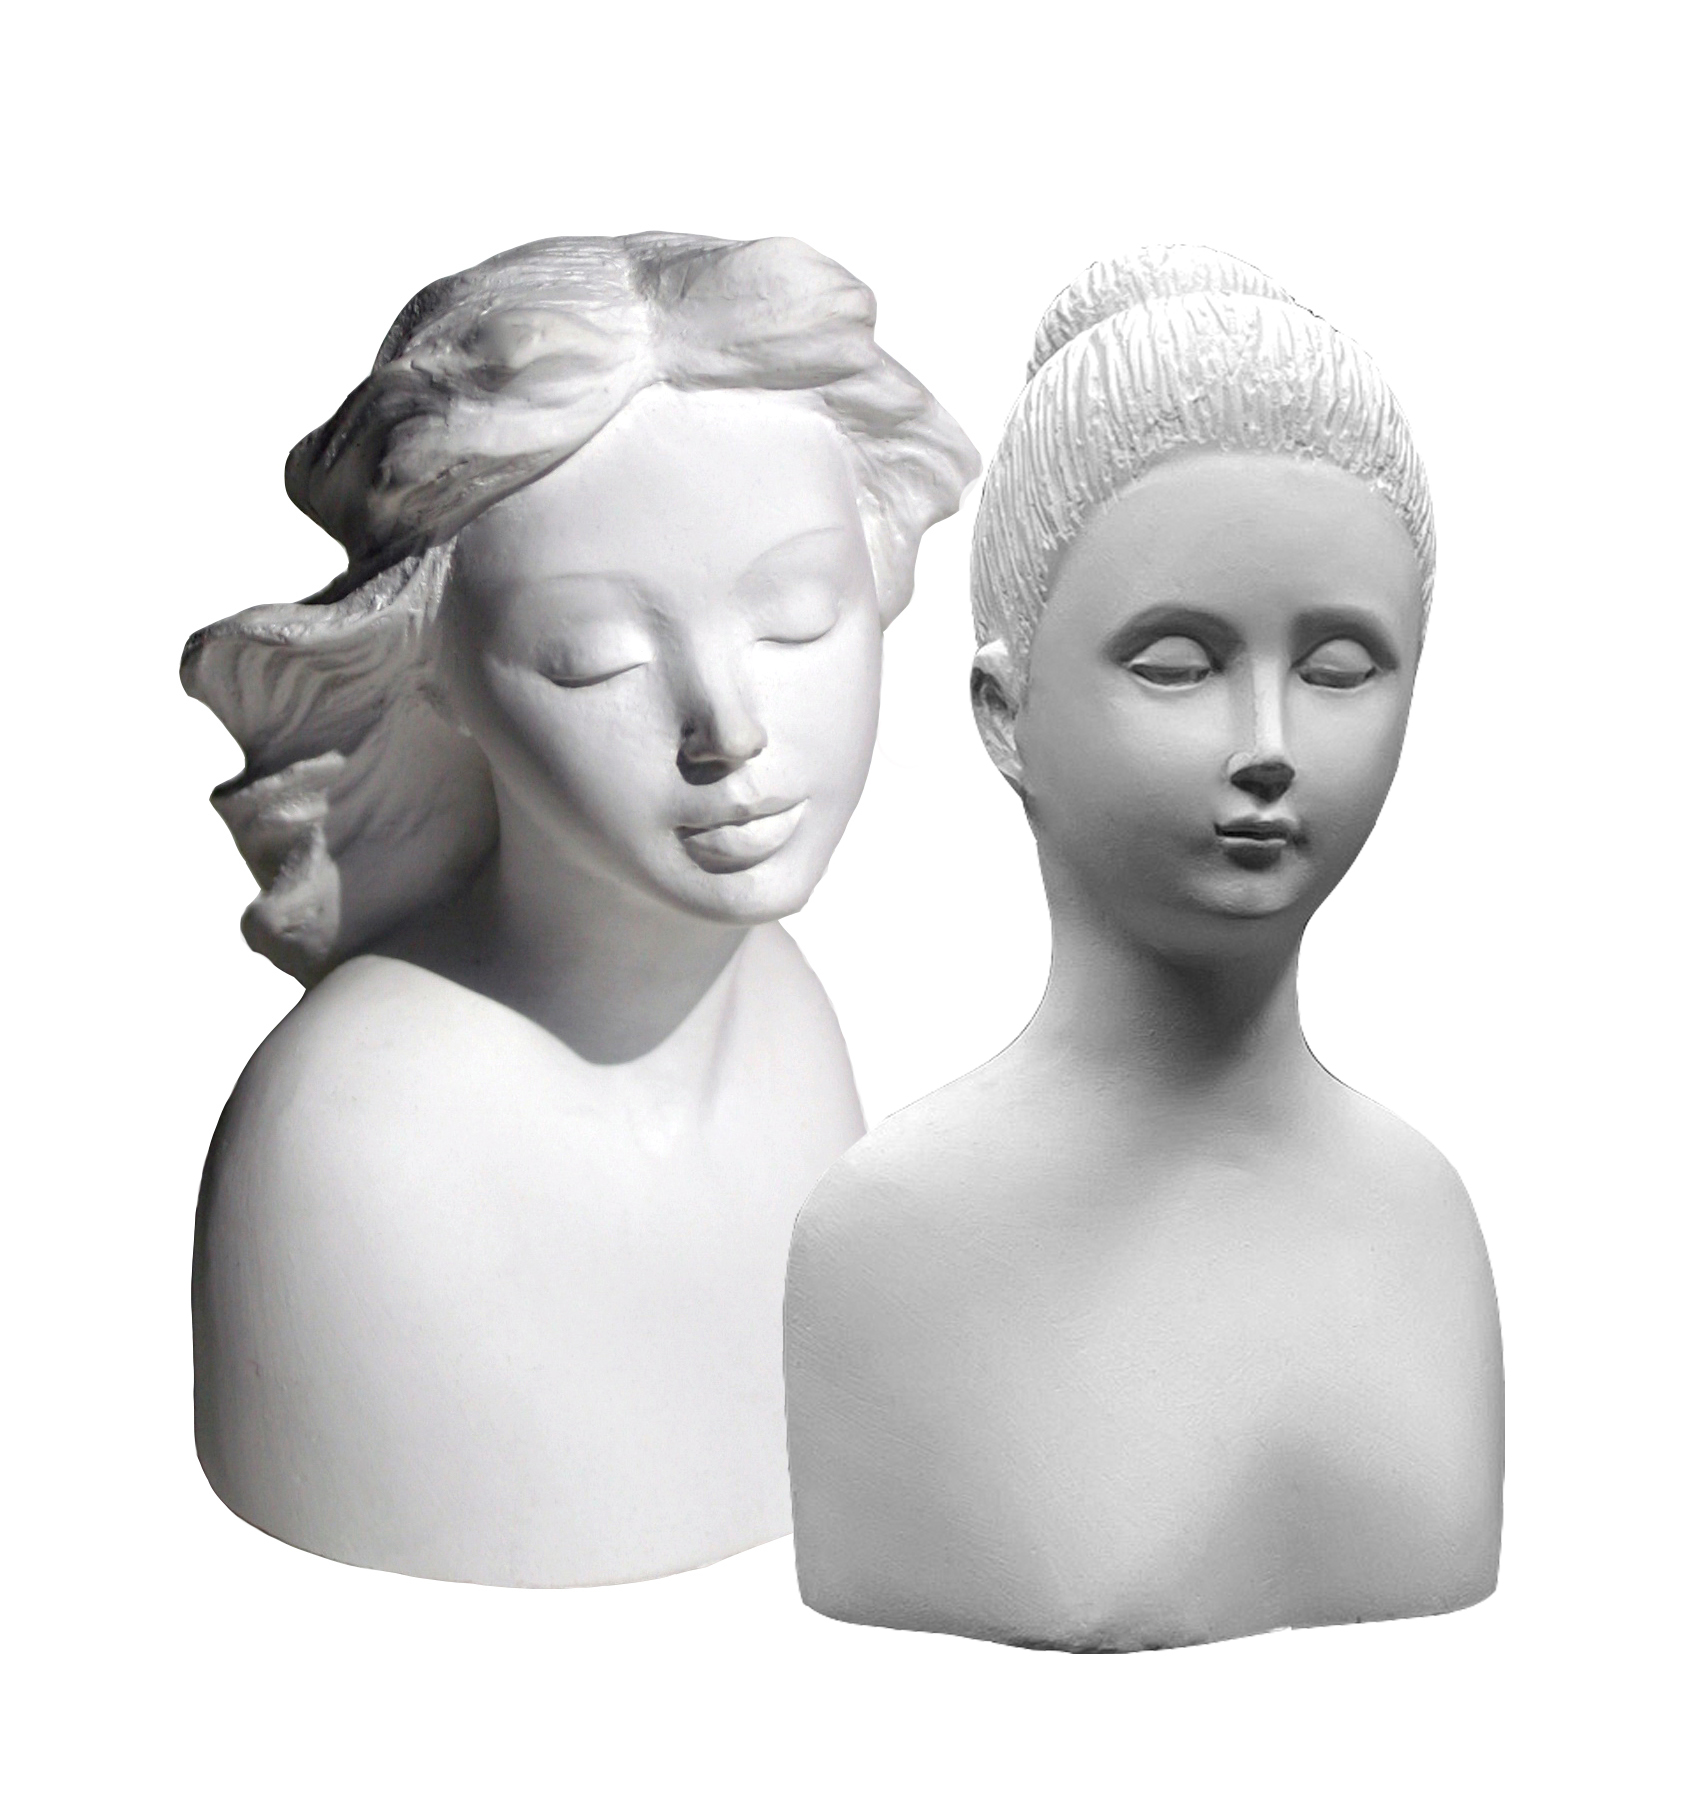 Plaster figurines and others